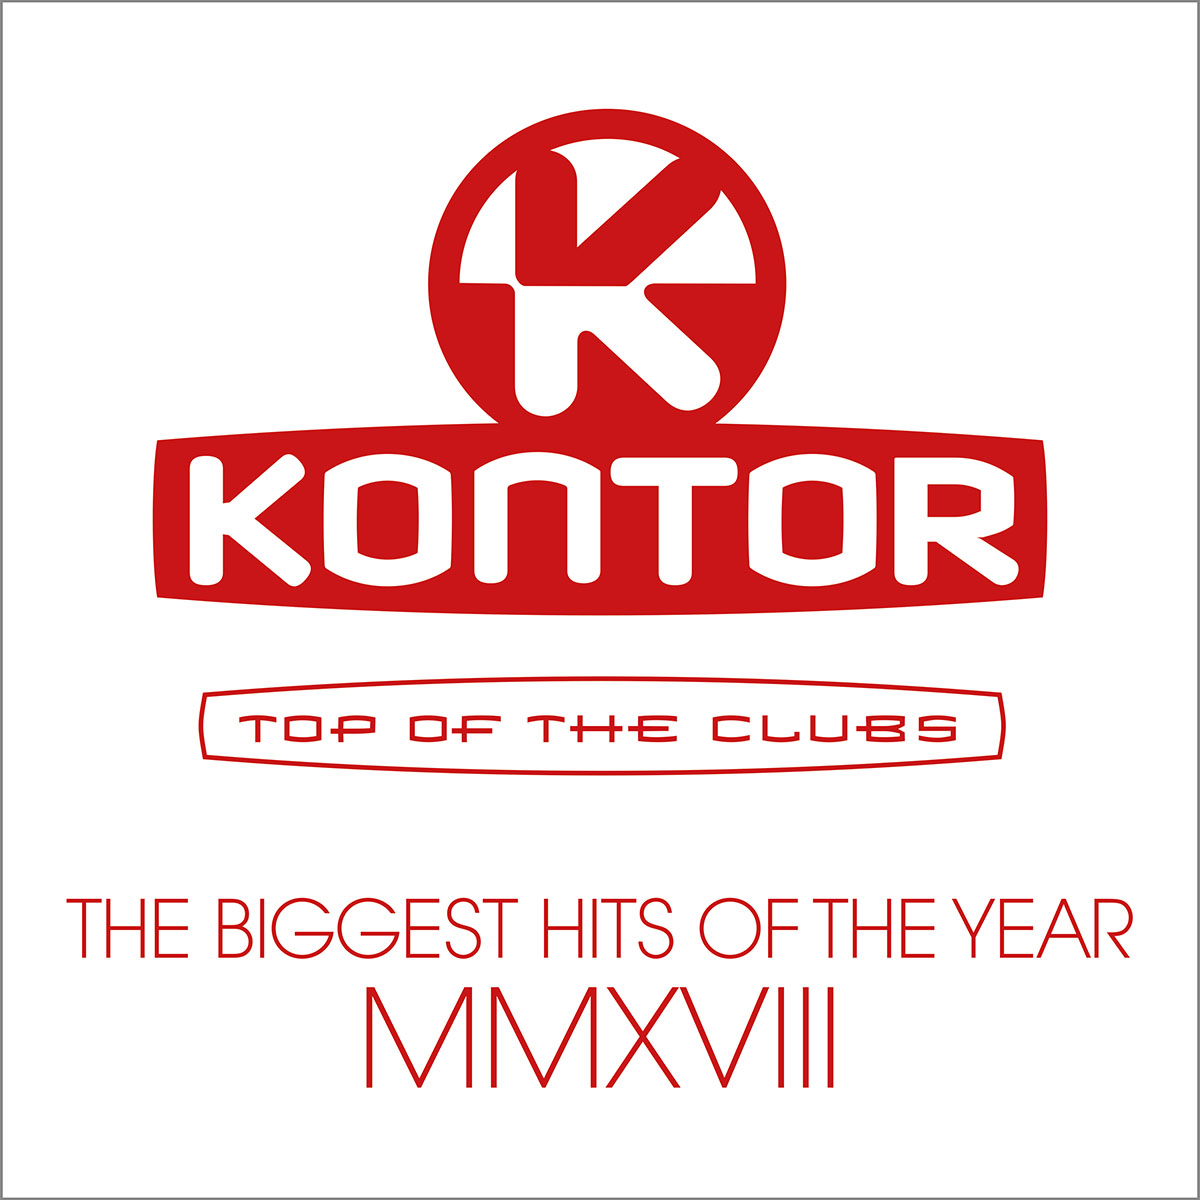 11Cover_Kontor TOTC – The Biggest Hits Of The Year MMXVIII (2018)_RGB (002)